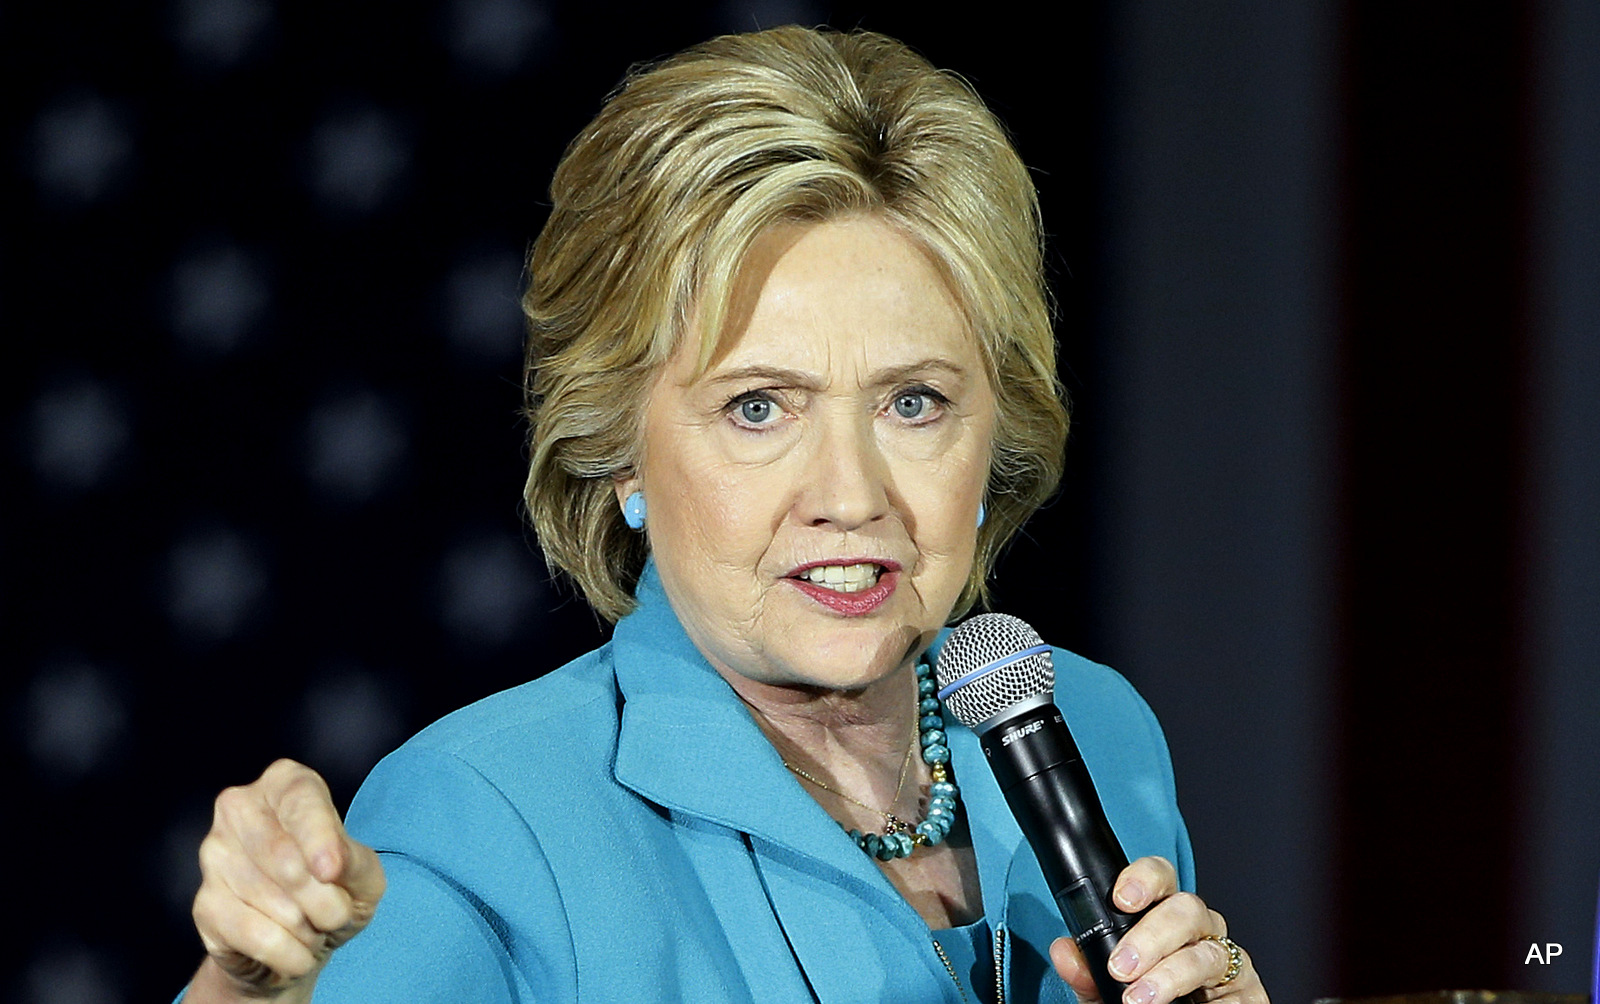 2016 file photo, Democratic presidential candidate Hillary Clinton speaks in Commerce, Calif. A State Department audit has faulted Hillary Clinton and previous top U.S. diplomats for poorly managing information and slowly responding to new cybersecurity risks. (AP Photo/John Locher, File)